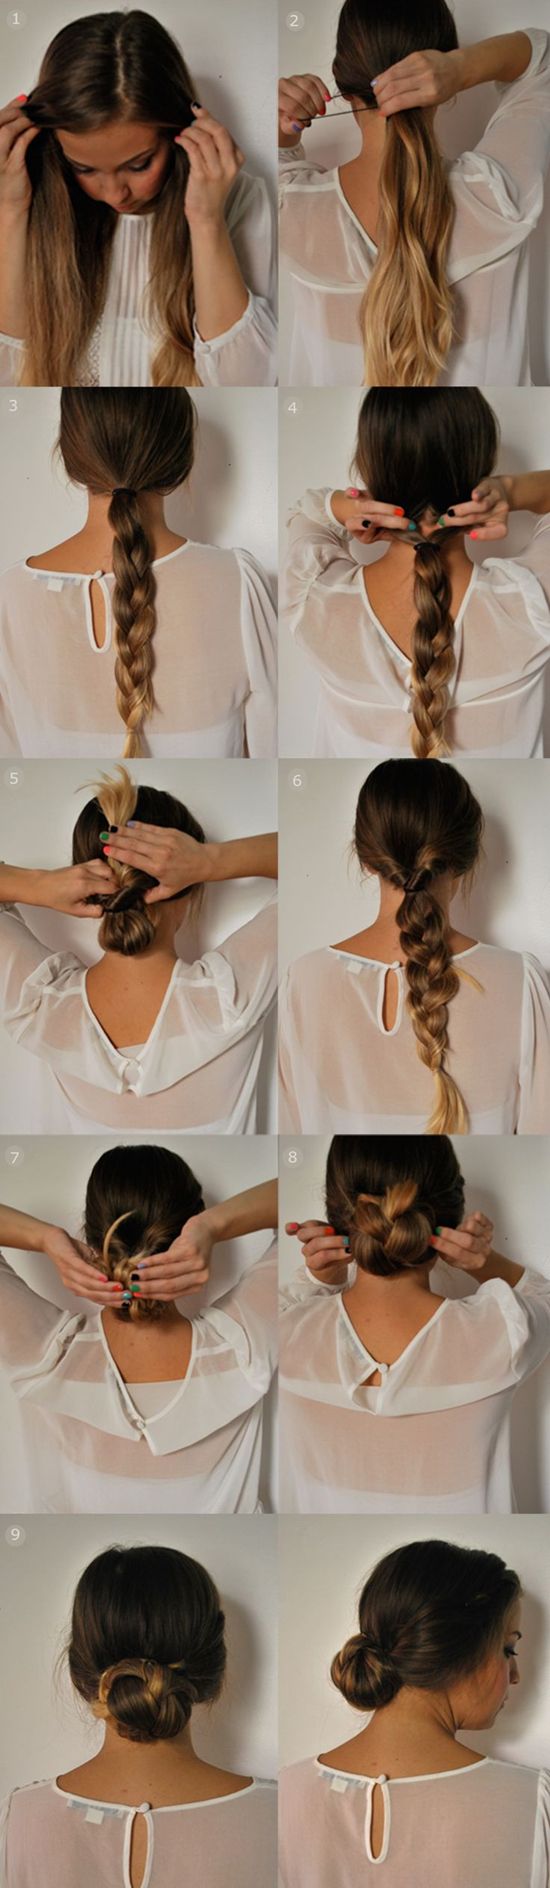 simple-cool-hairstyles-for-long-hair-53_13 Simple cool hairstyles for long hair